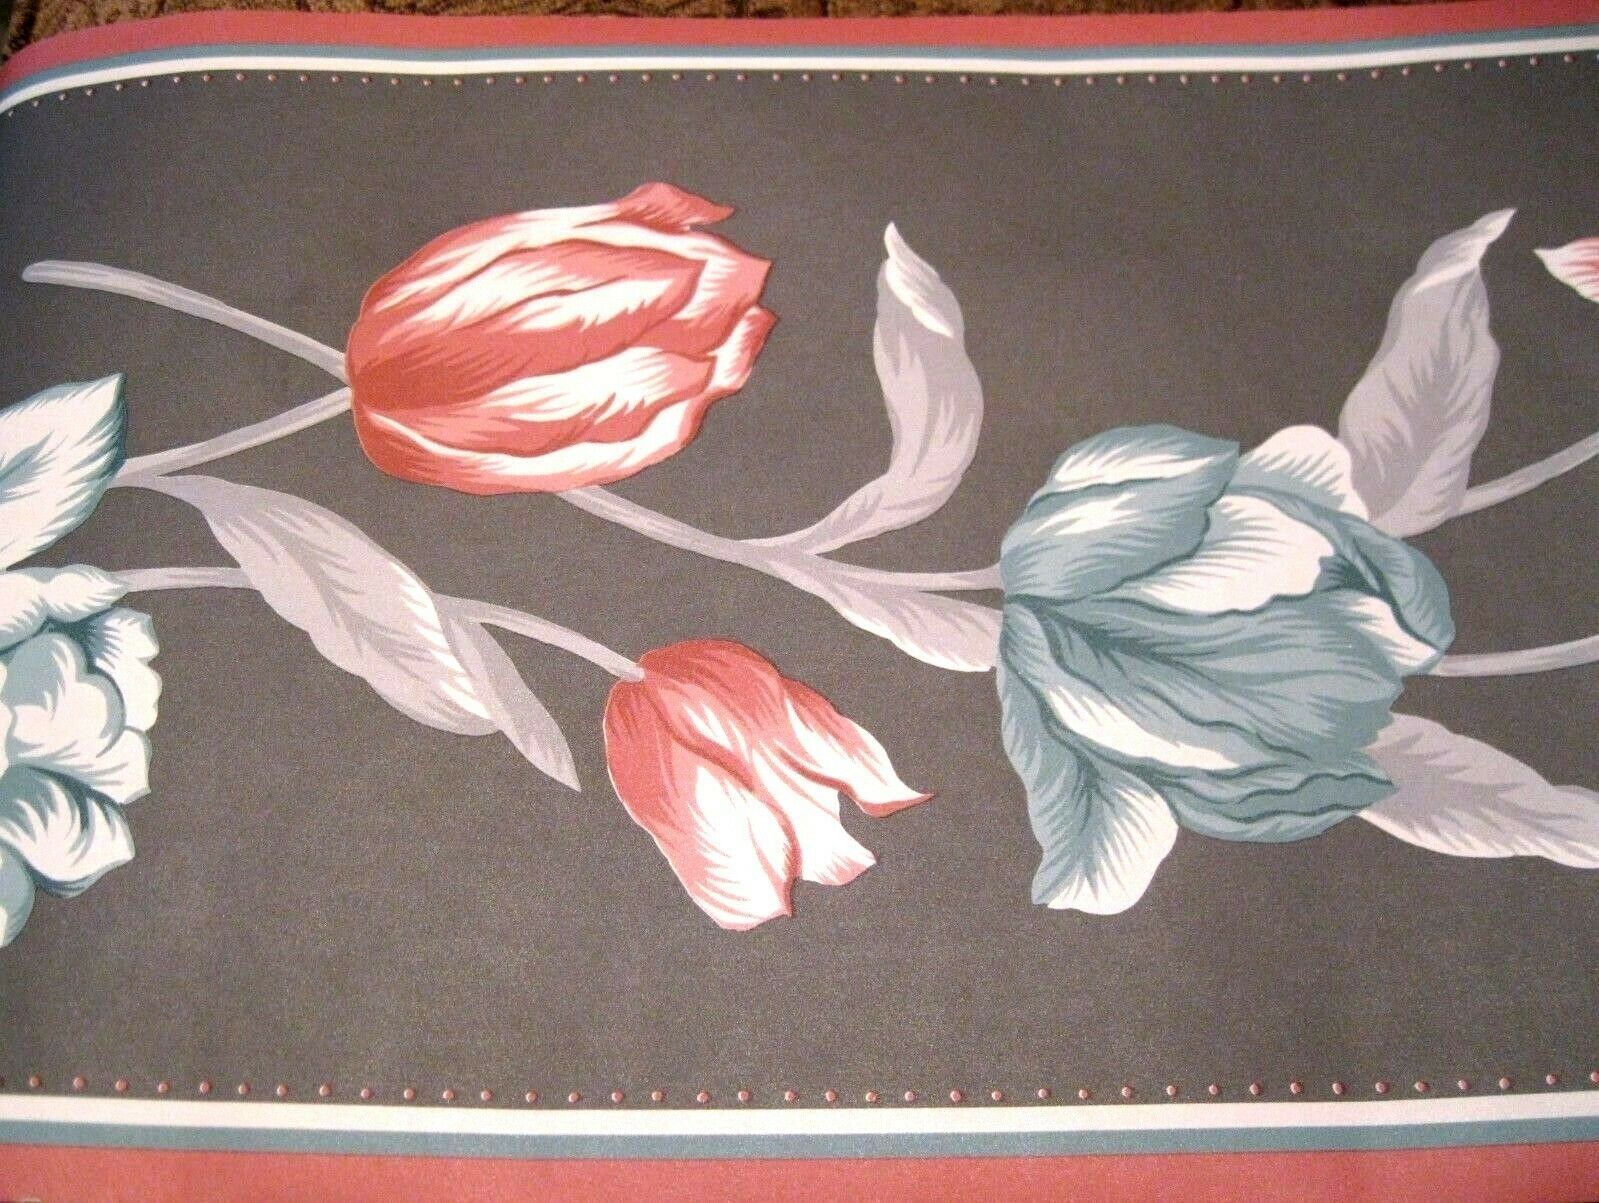 Primary image for Floral Charcoal Dark Gray Grey Wallpaper Border Brick Red +Teal Tulips PD-8001B